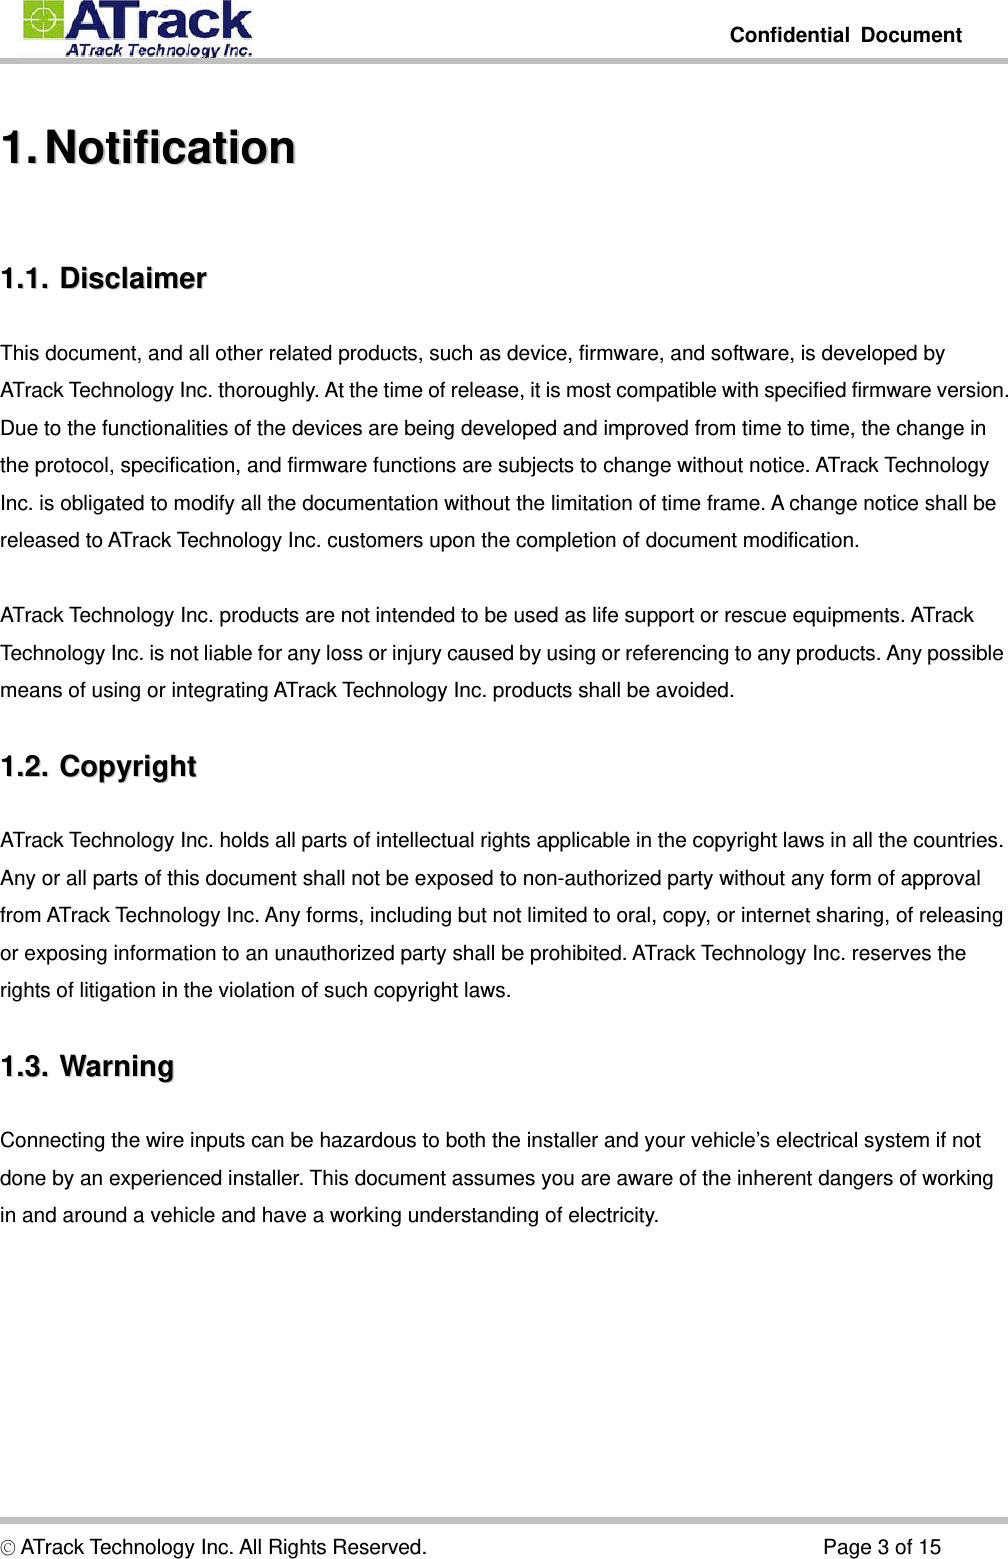         Confidential Document  © ATrack Technology Inc. All Rights Reserved.                                      Page 3 of 15 11..  NNoottiiffiiccaattiioonn  11..11..  DDiissccllaaiimmeerr  This document, and all other related products, such as device, firmware, and software, is developed by ATrack Technology Inc. thoroughly. At the time of release, it is most compatible with specified firmware version. Due to the functionalities of the devices are being developed and improved from time to time, the change in the protocol, specification, and firmware functions are subjects to change without notice. ATrack Technology Inc. is obligated to modify all the documentation without the limitation of time frame. A change notice shall be released to ATrack Technology Inc. customers upon the completion of document modification.  ATrack Technology Inc. products are not intended to be used as life support or rescue equipments. ATrack Technology Inc. is not liable for any loss or injury caused by using or referencing to any products. Any possible means of using or integrating ATrack Technology Inc. products shall be avoided. 11..22..  CCooppyyrriigghhtt  ATrack Technology Inc. holds all parts of intellectual rights applicable in the copyright laws in all the countries. Any or all parts of this document shall not be exposed to non-authorized party without any form of approval from ATrack Technology Inc. Any forms, including but not limited to oral, copy, or internet sharing, of releasing or exposing information to an unauthorized party shall be prohibited. ATrack Technology Inc. reserves the rights of litigation in the violation of such copyright laws. 11..33..  WWaarrnniinngg  Connecting the wire inputs can be hazardous to both the installer and your vehicle’s electrical system if not done by an experienced installer. This document assumes you are aware of the inherent dangers of working in and around a vehicle and have a working understanding of electricity. 